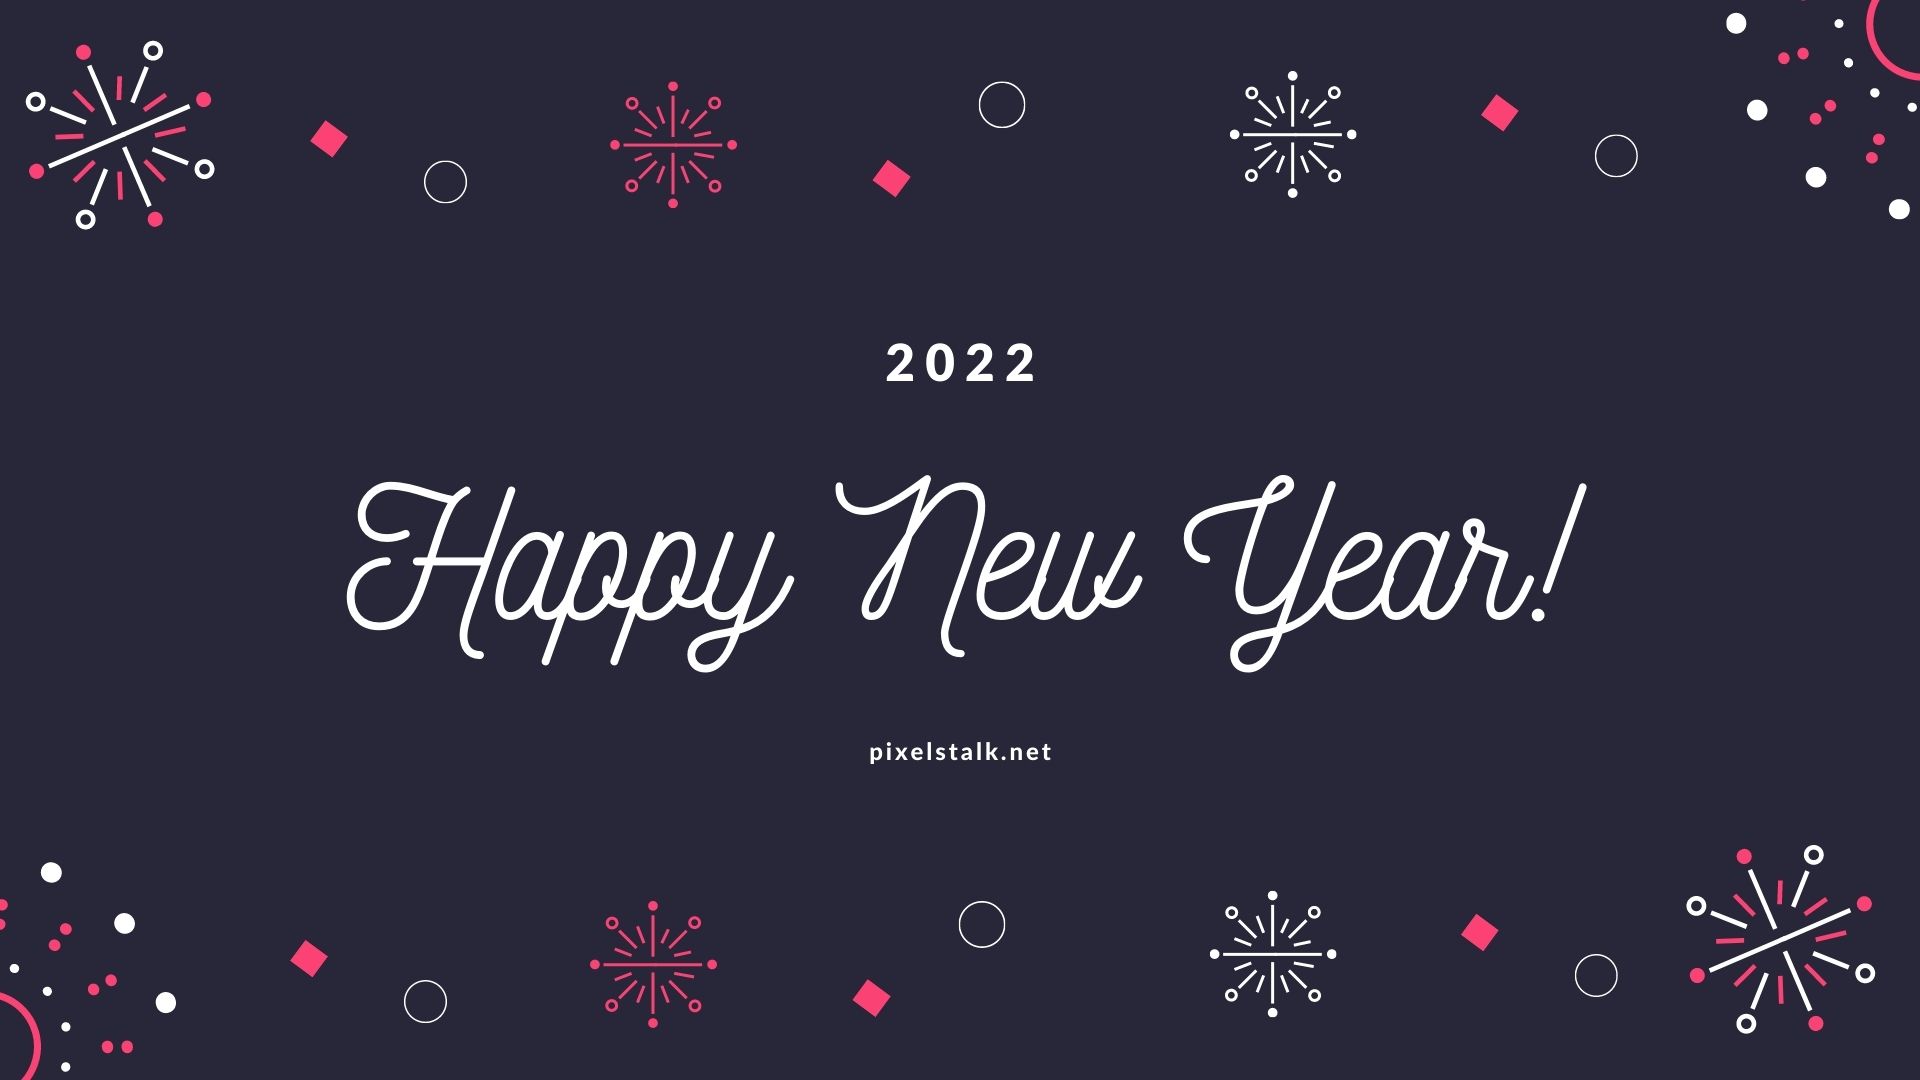 New Year Computer Backgrounds